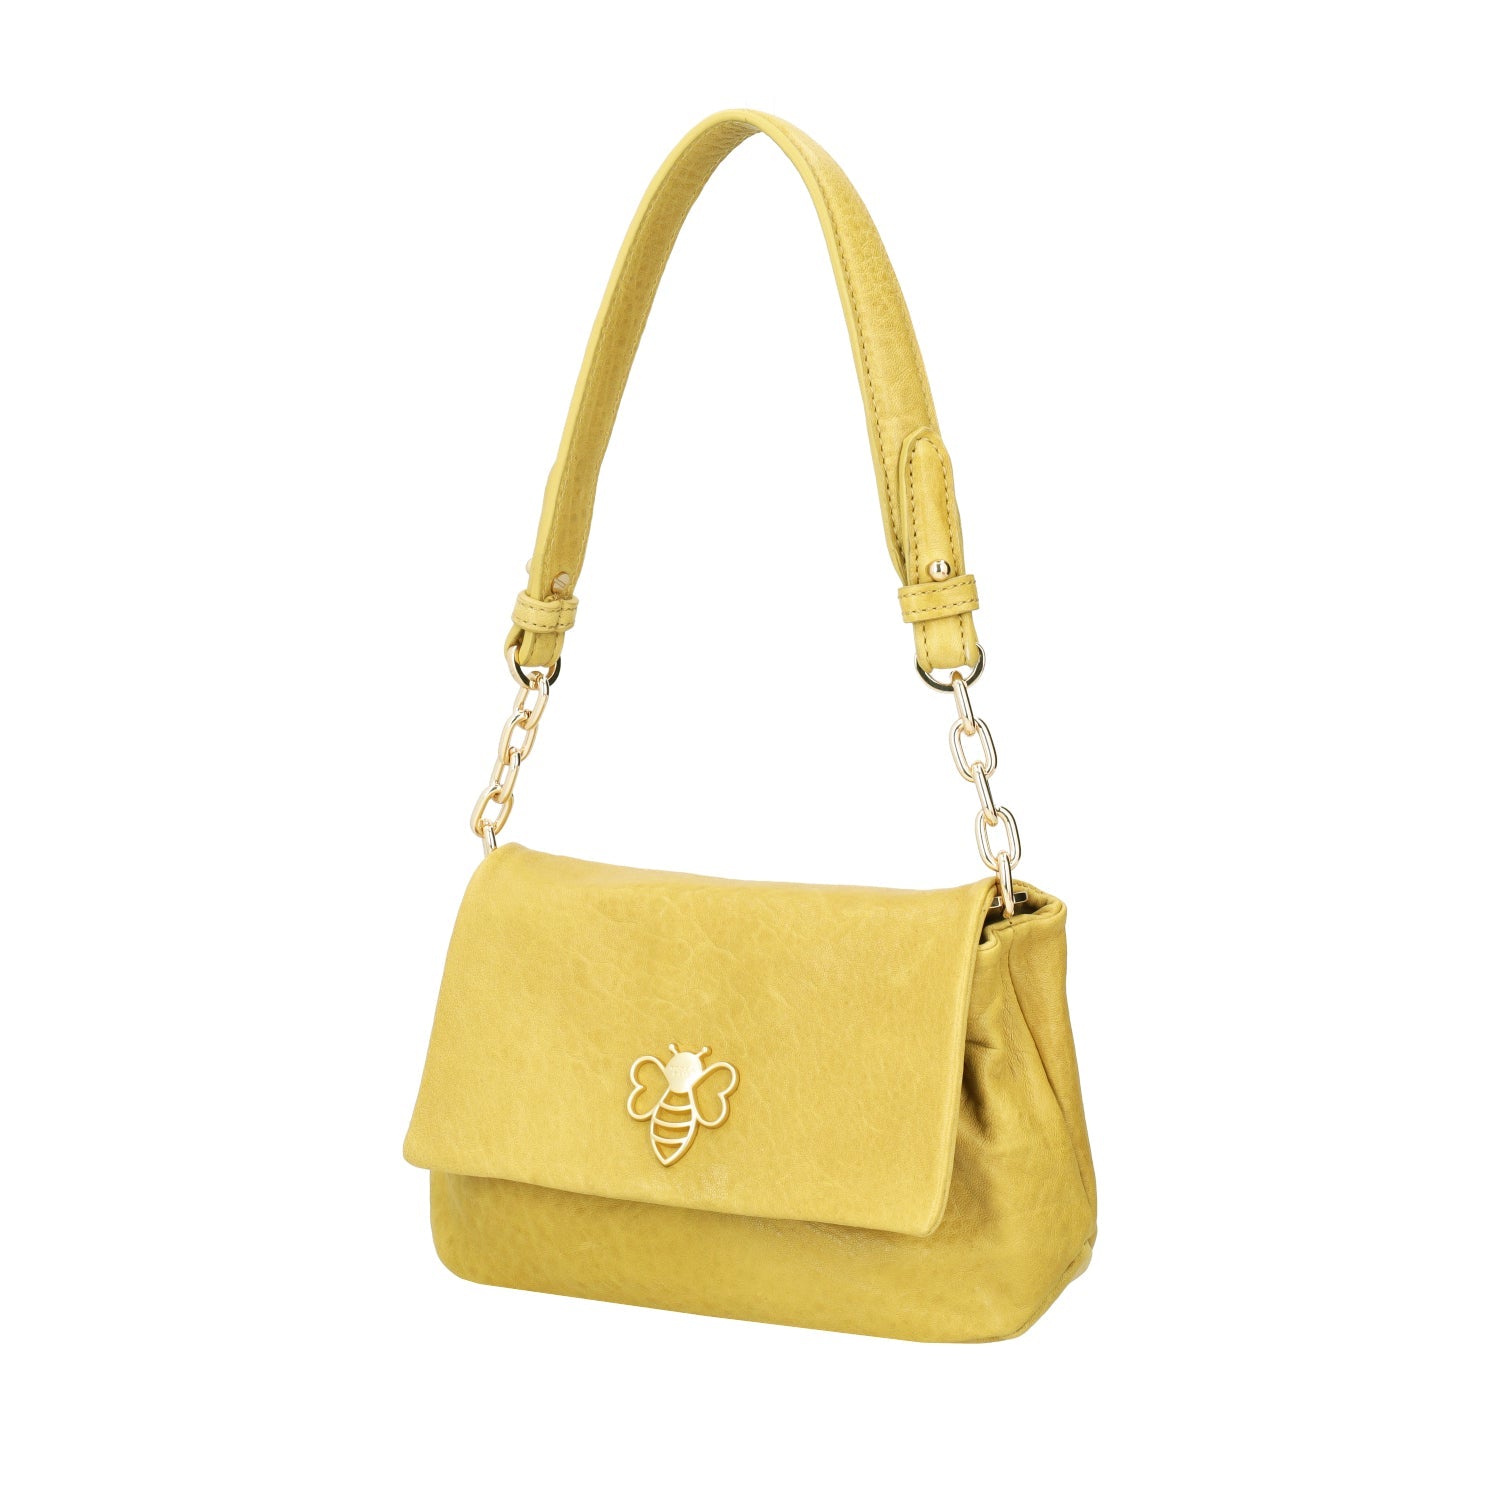 YELLOW GLADIOLO CROSSBODY BAG IN LEATHER